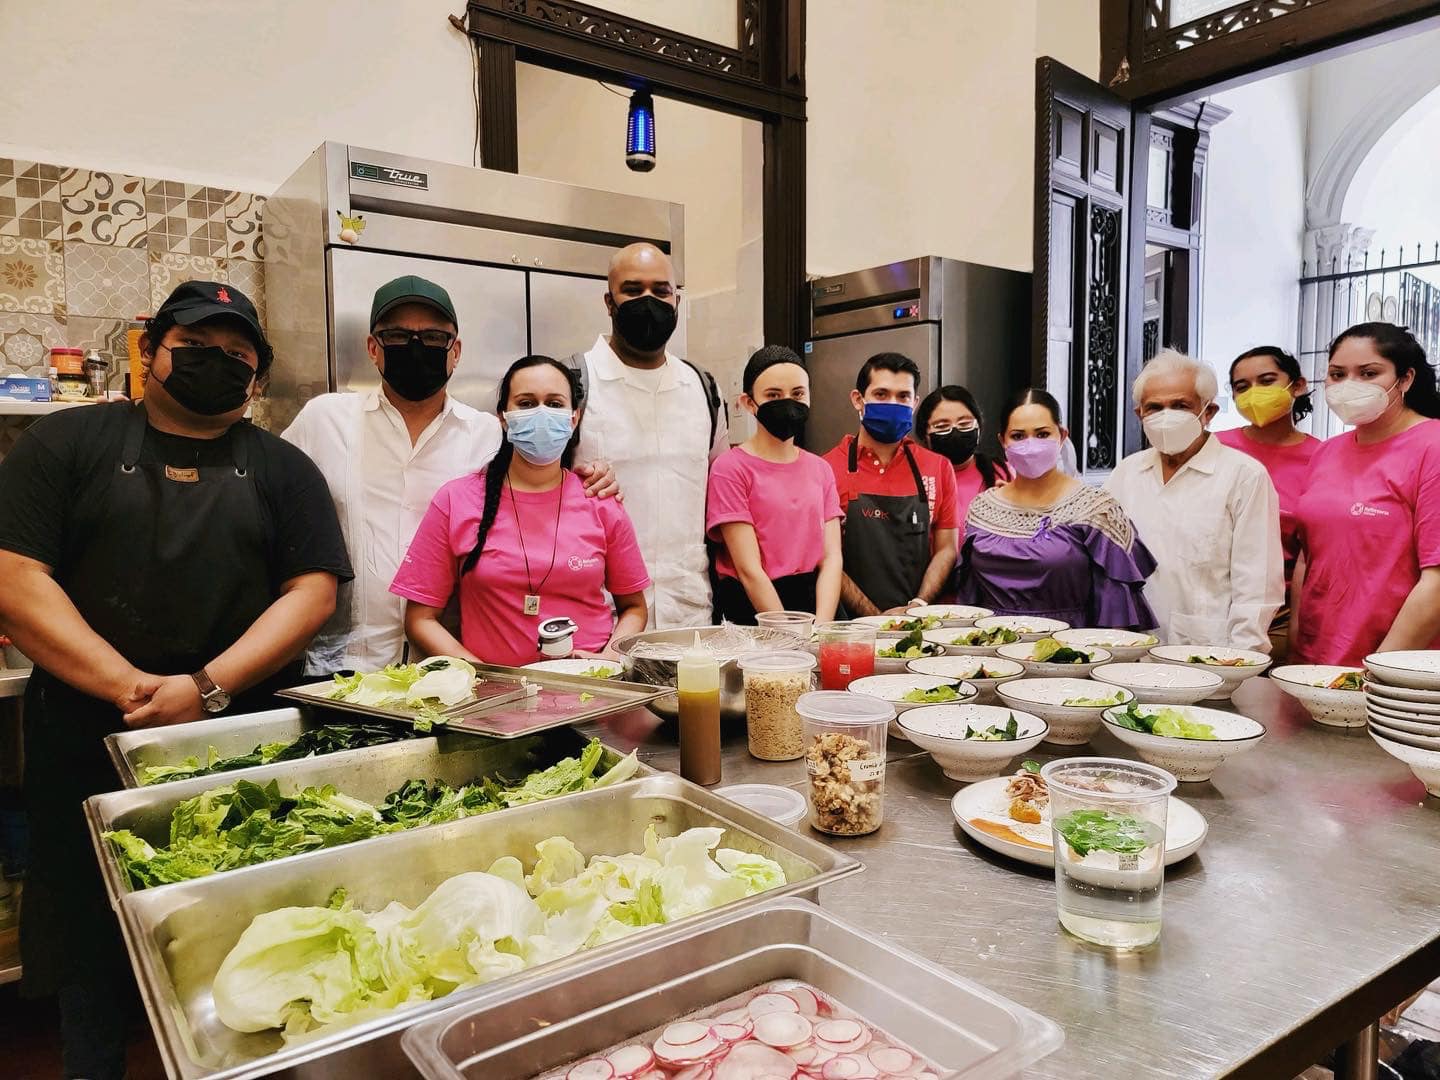 Marlon Lynch standing with students in food prep kitchen.